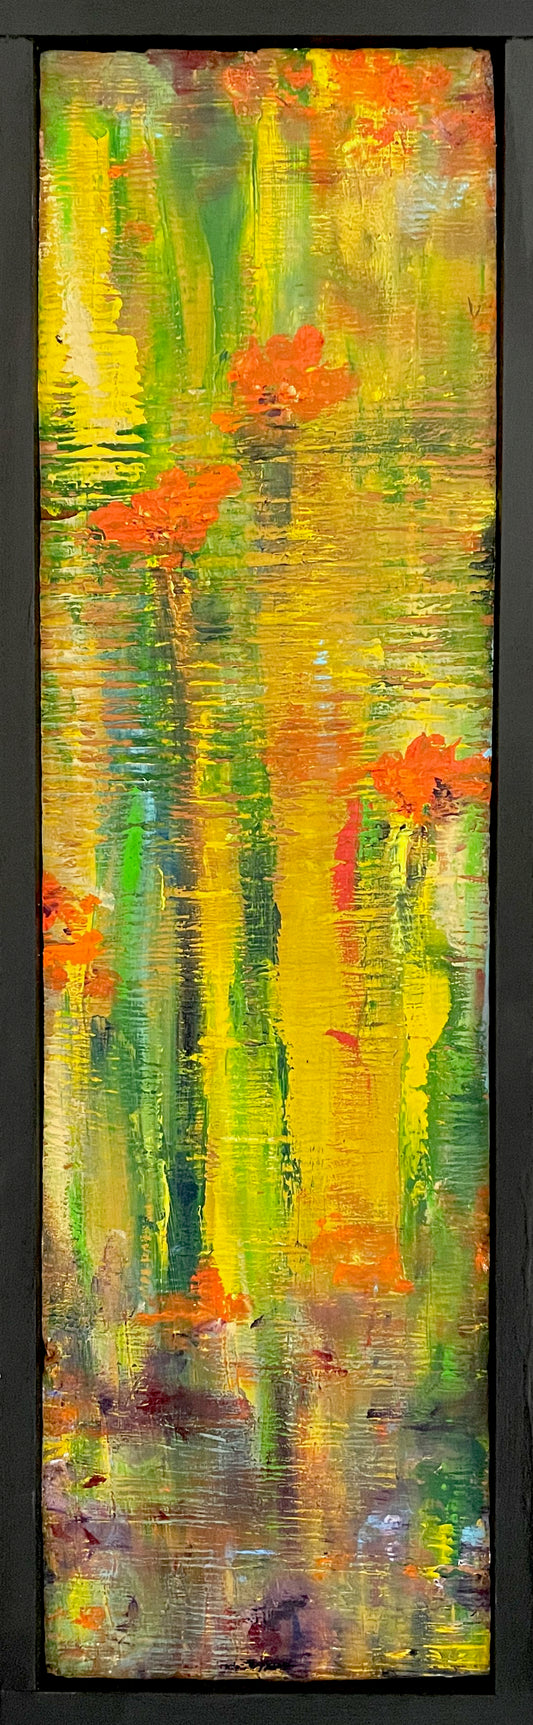 Reflections of Spring [SOLD]